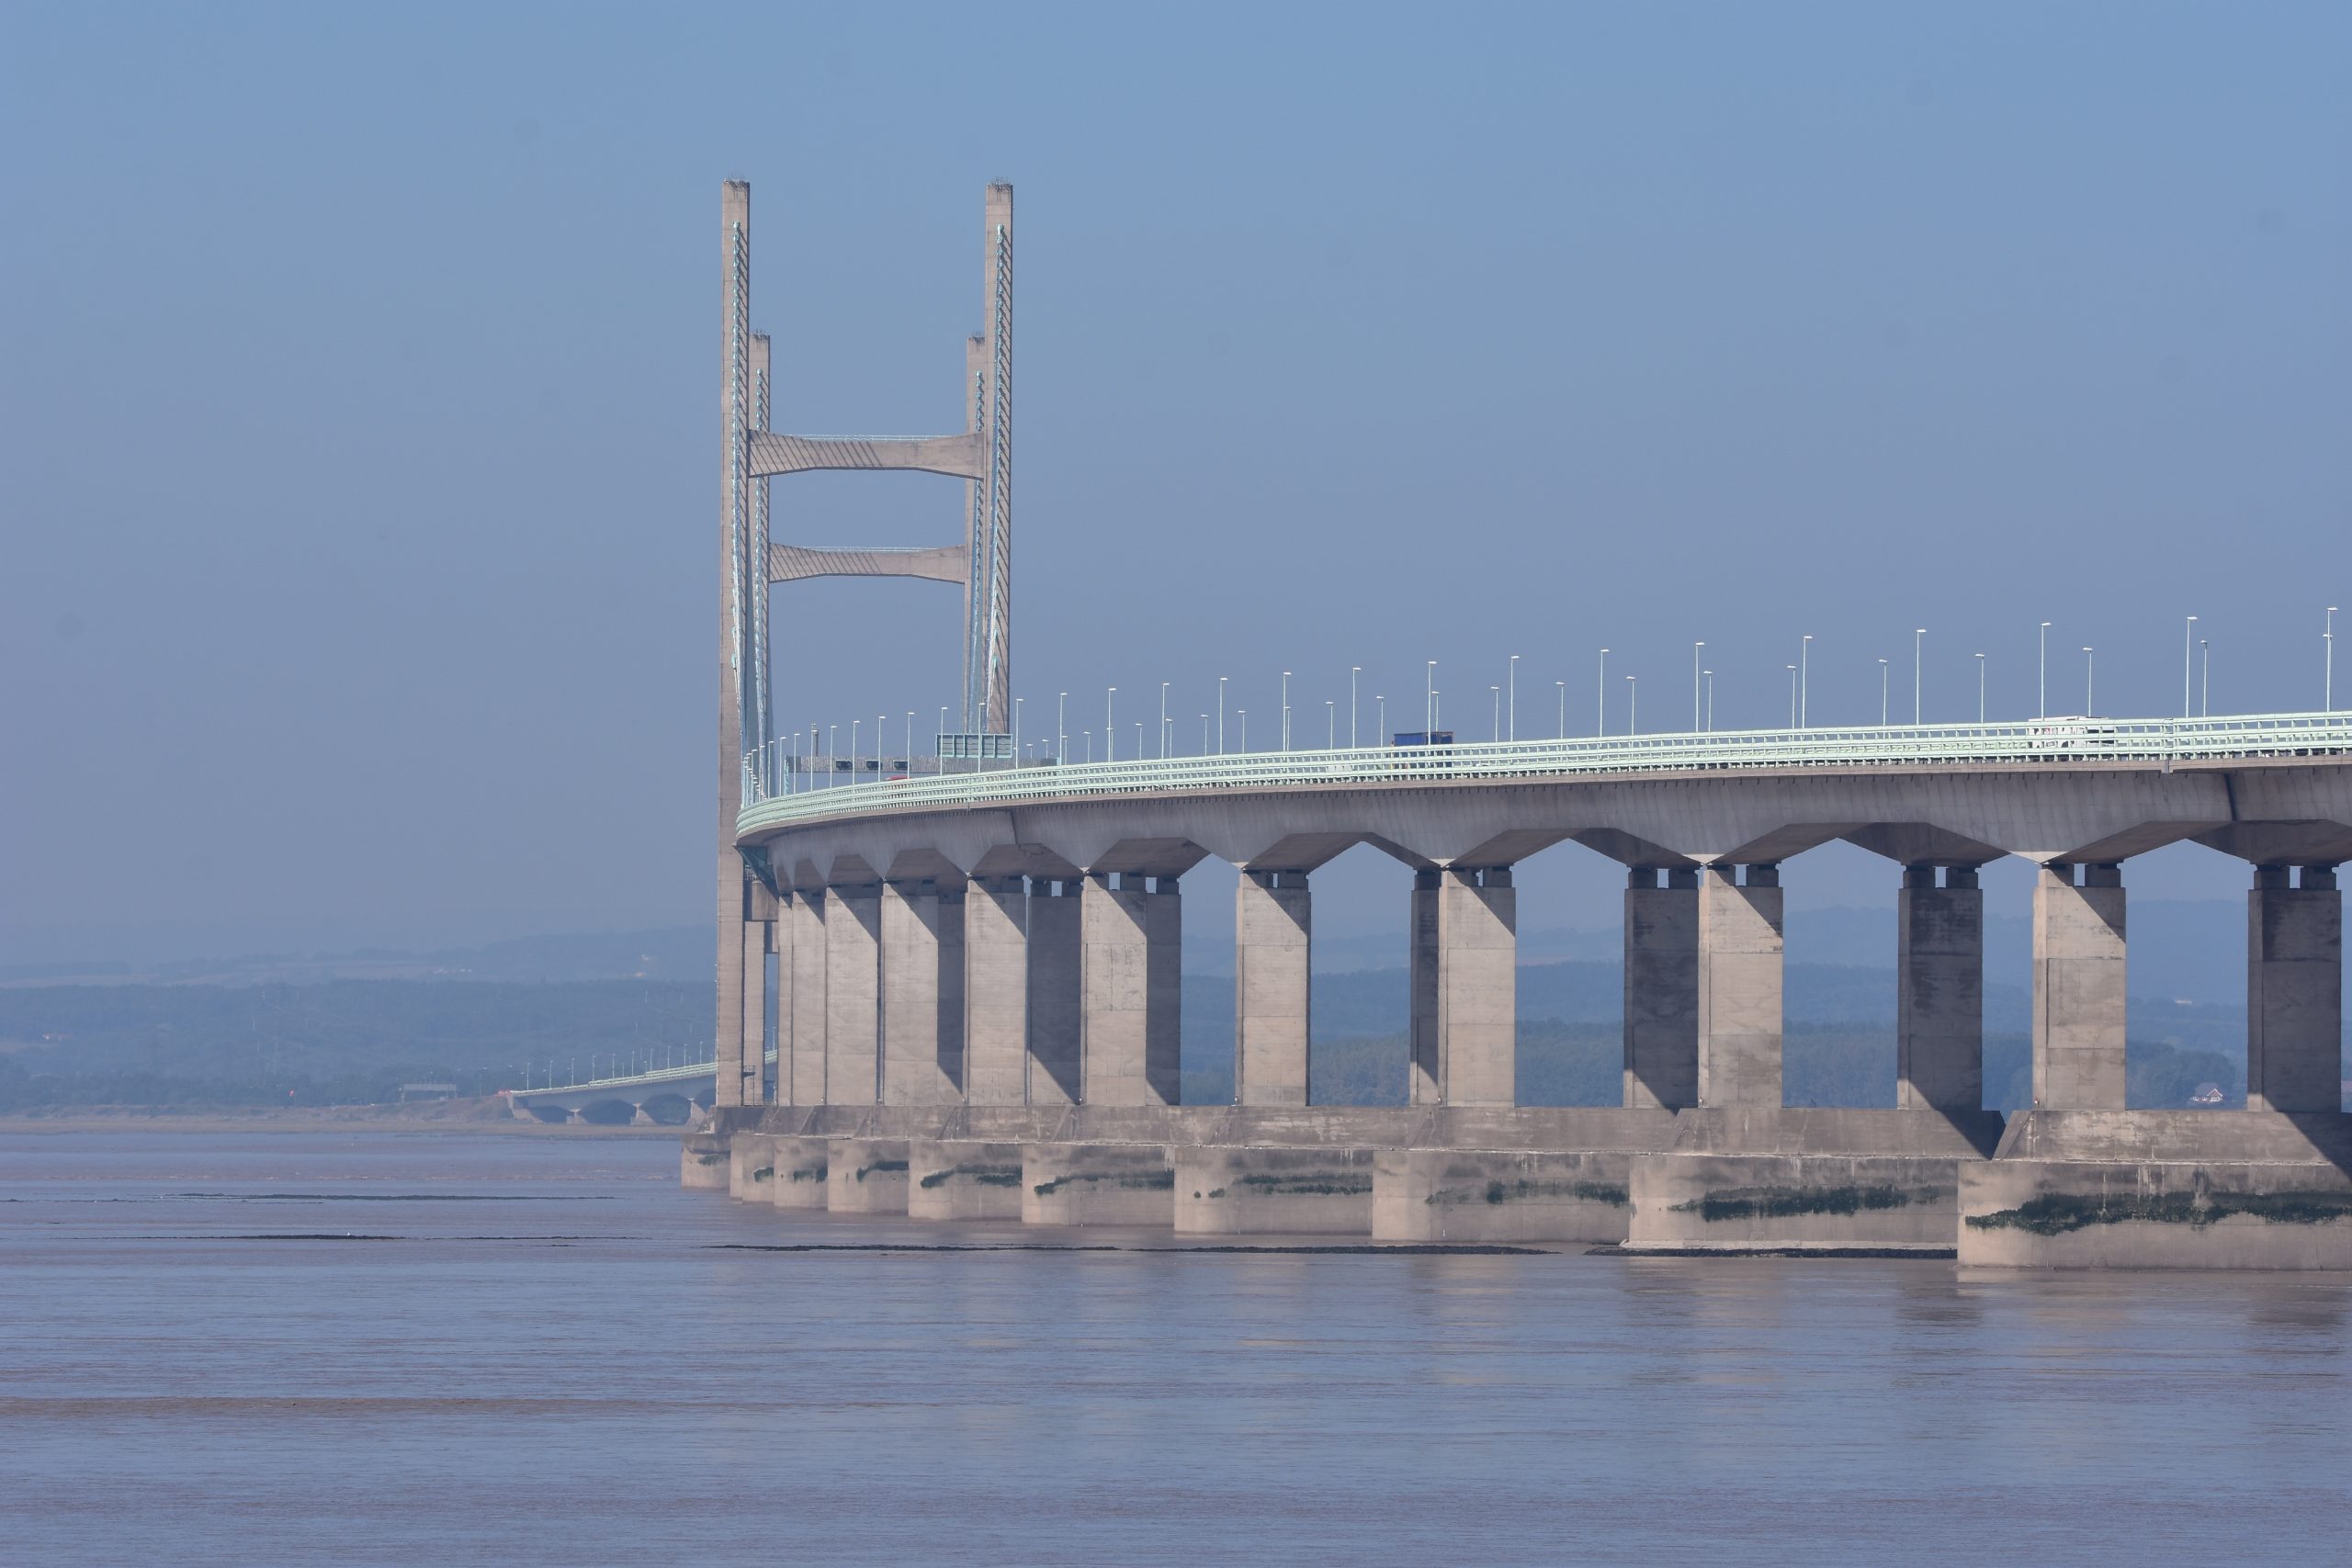 NEWS | Police aware of a planned protest on the M4 Prince of Wales (Severn Crossing) on Monday